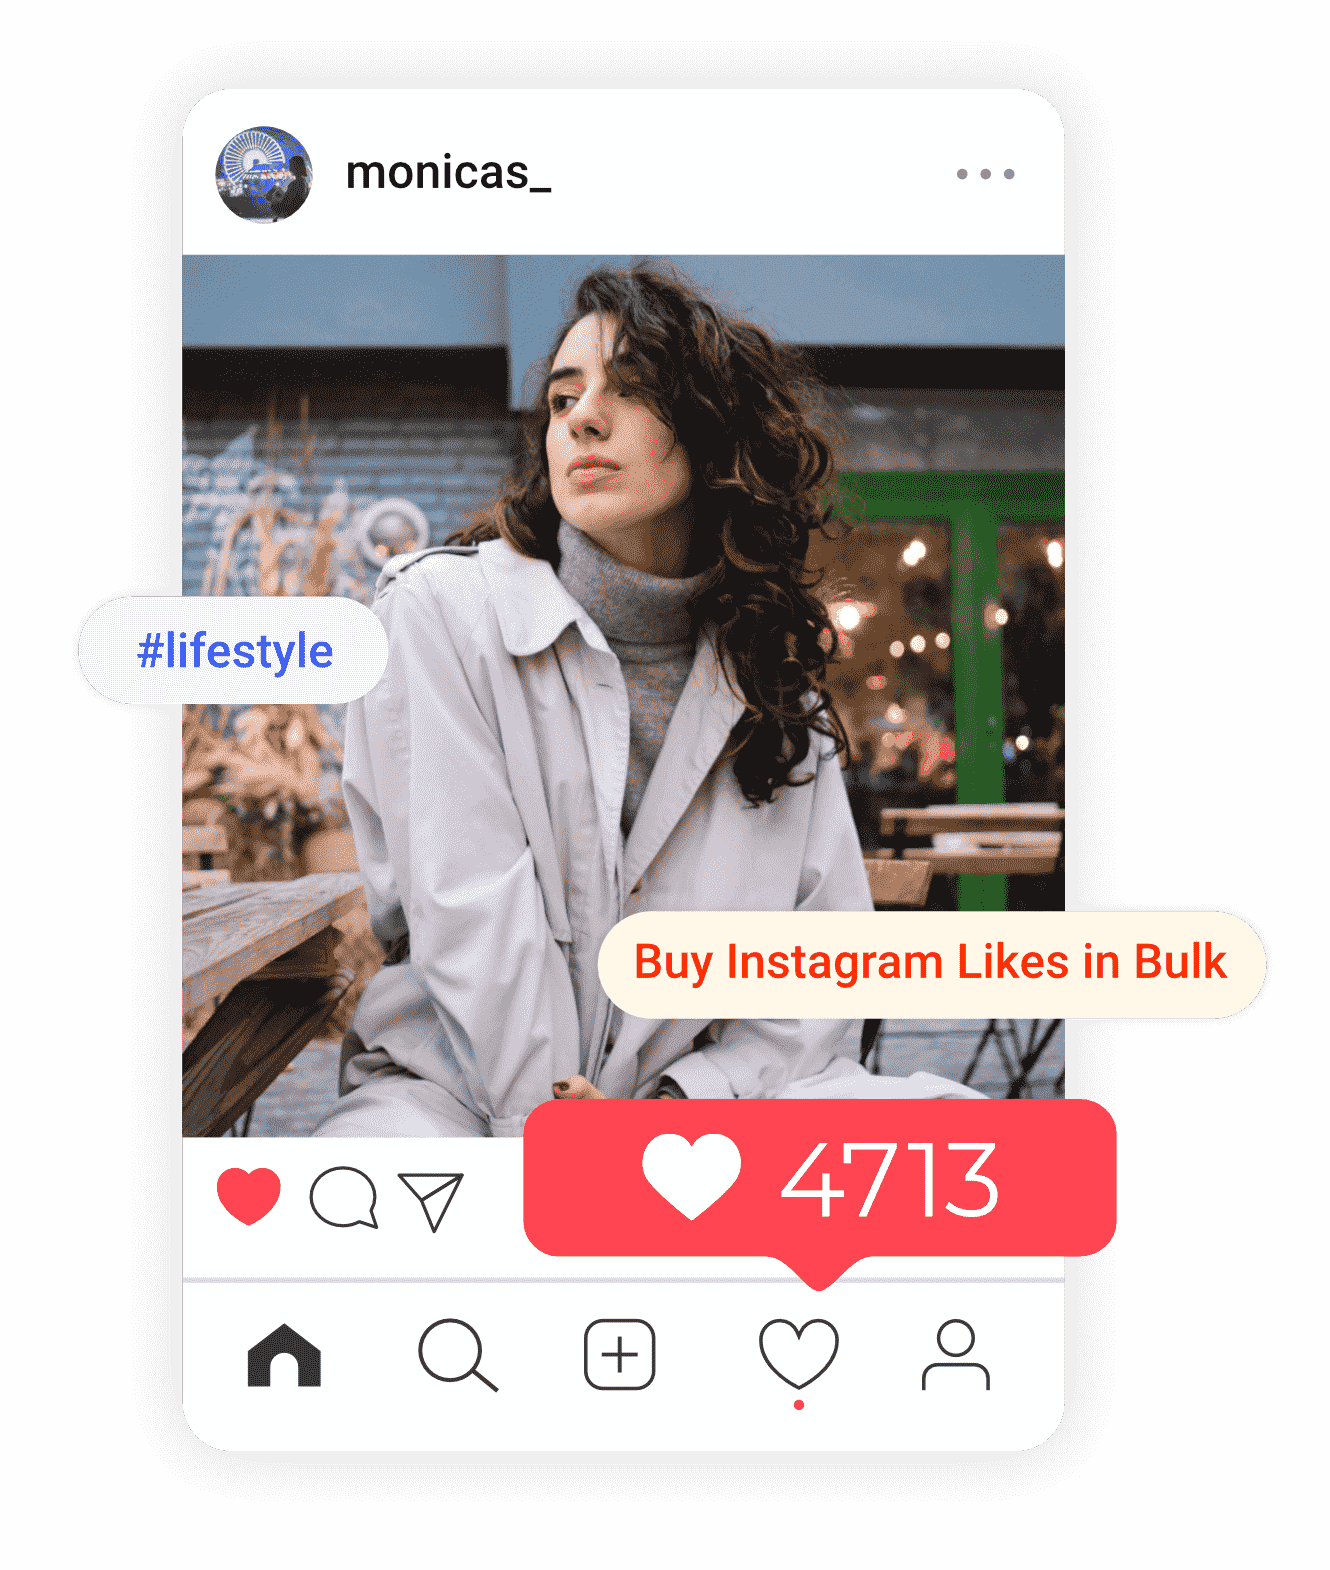 an image of monica s who recently purchased instagram likes from buysellshoutouts.com